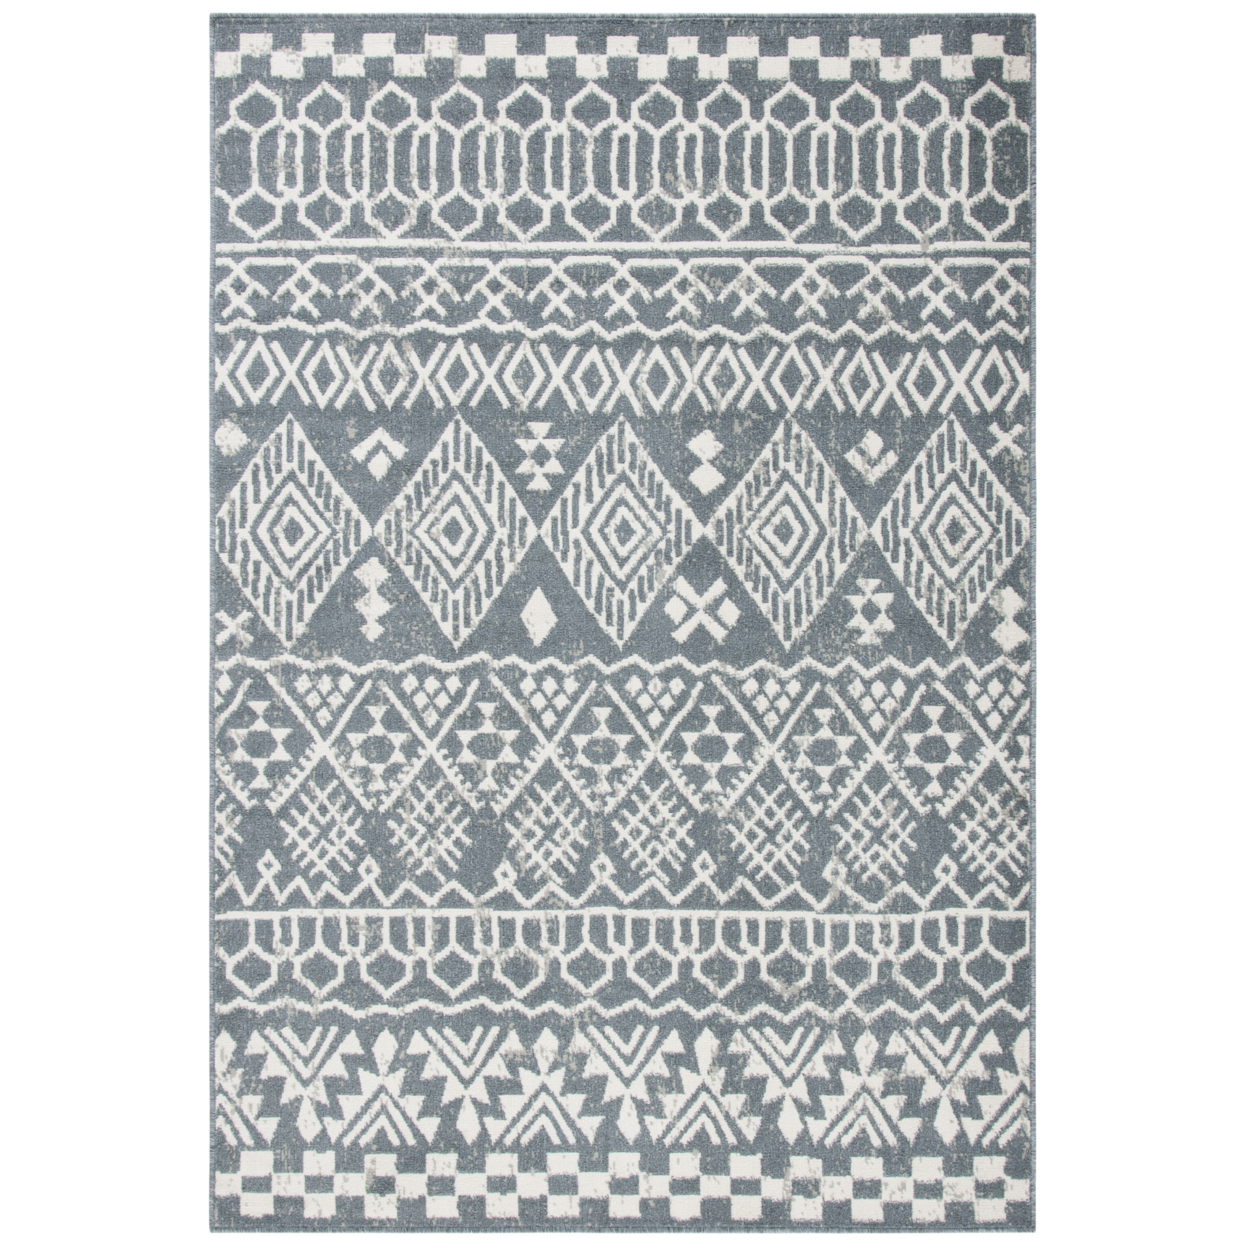 SAFAVIEH Pyramid Collection PYR205A Ivory / Charcoal Rug - 6-7 X 6-7 Square